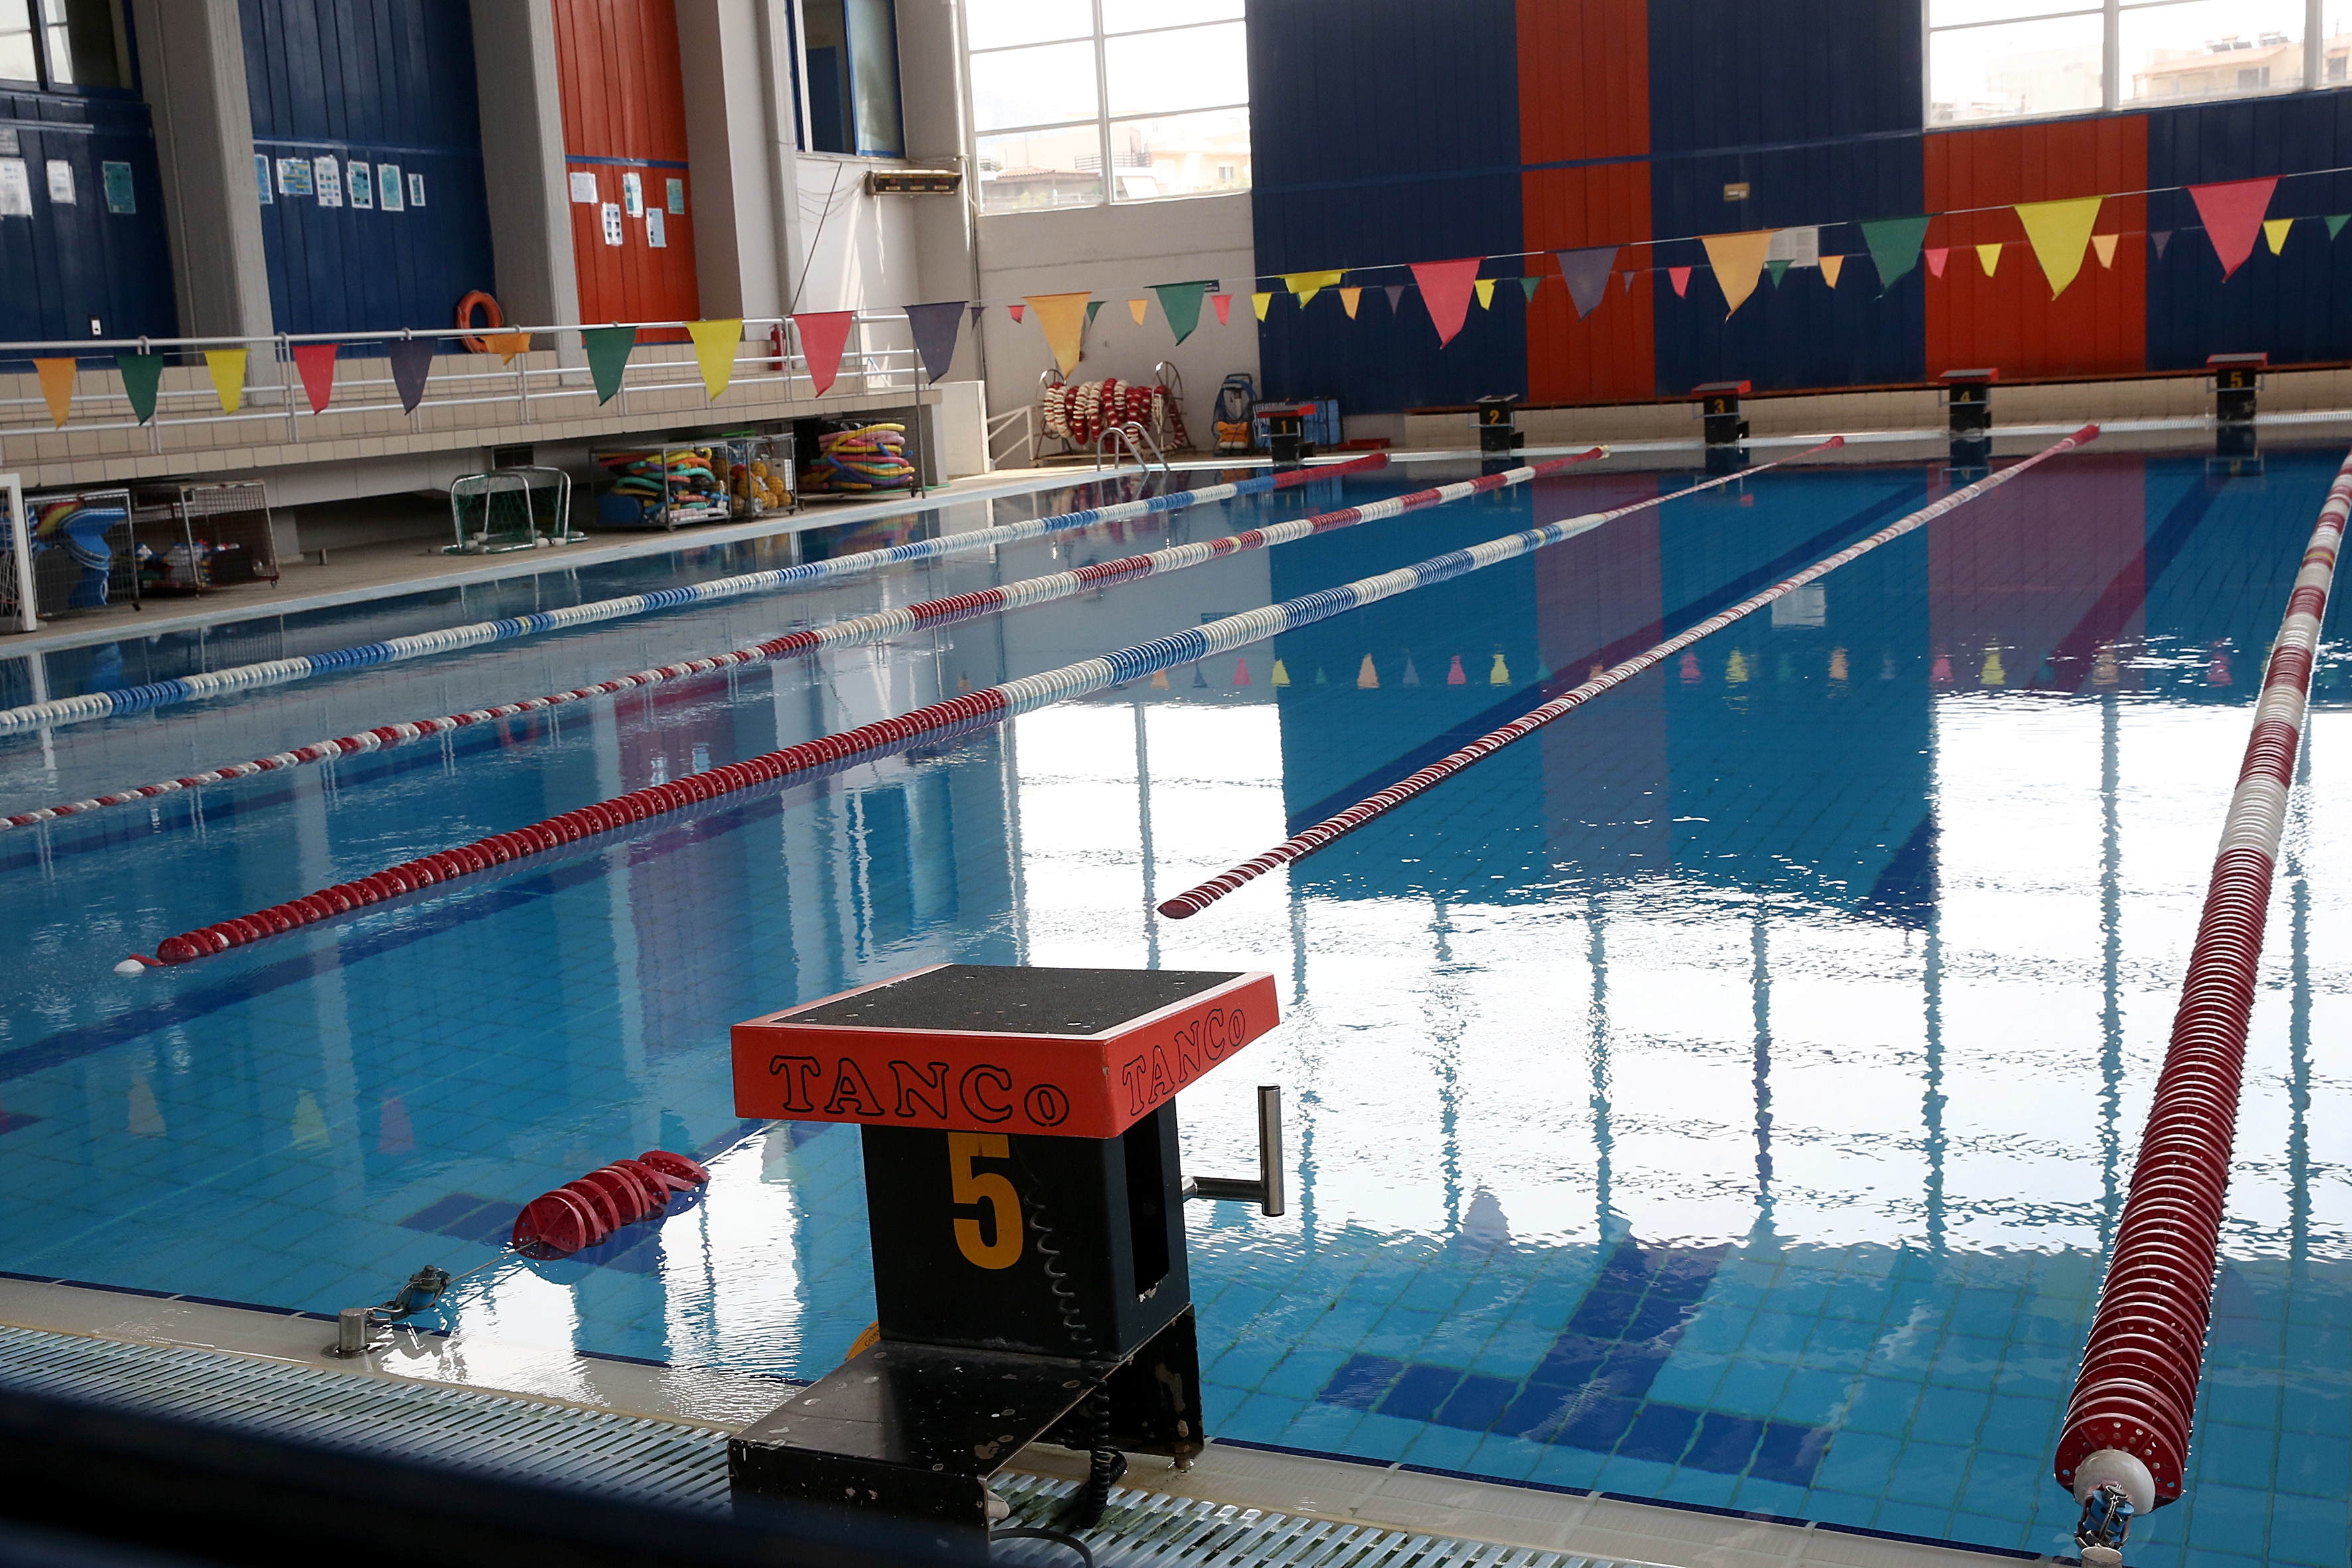 A deserted swimming pool due to lockdown measures.